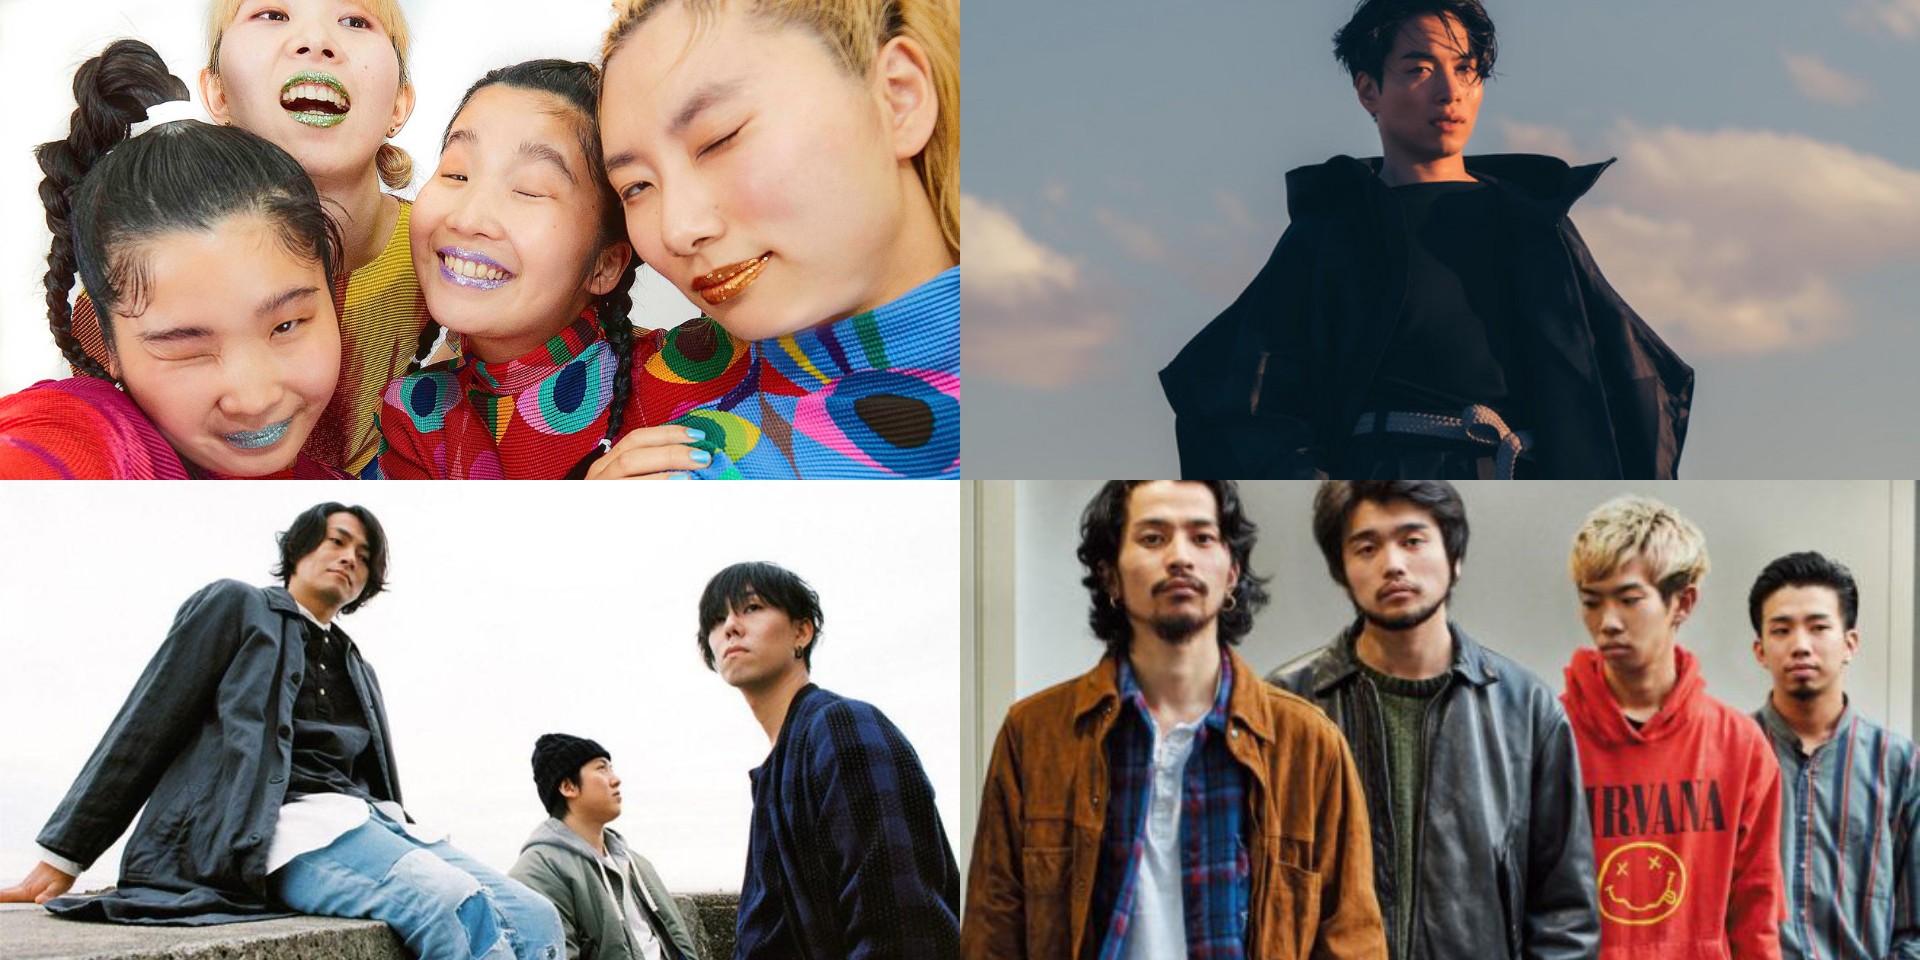 RADWIMPS, CHAI, King Gnu, SIRUP, and more to perform at Fuji Rock Festival this August